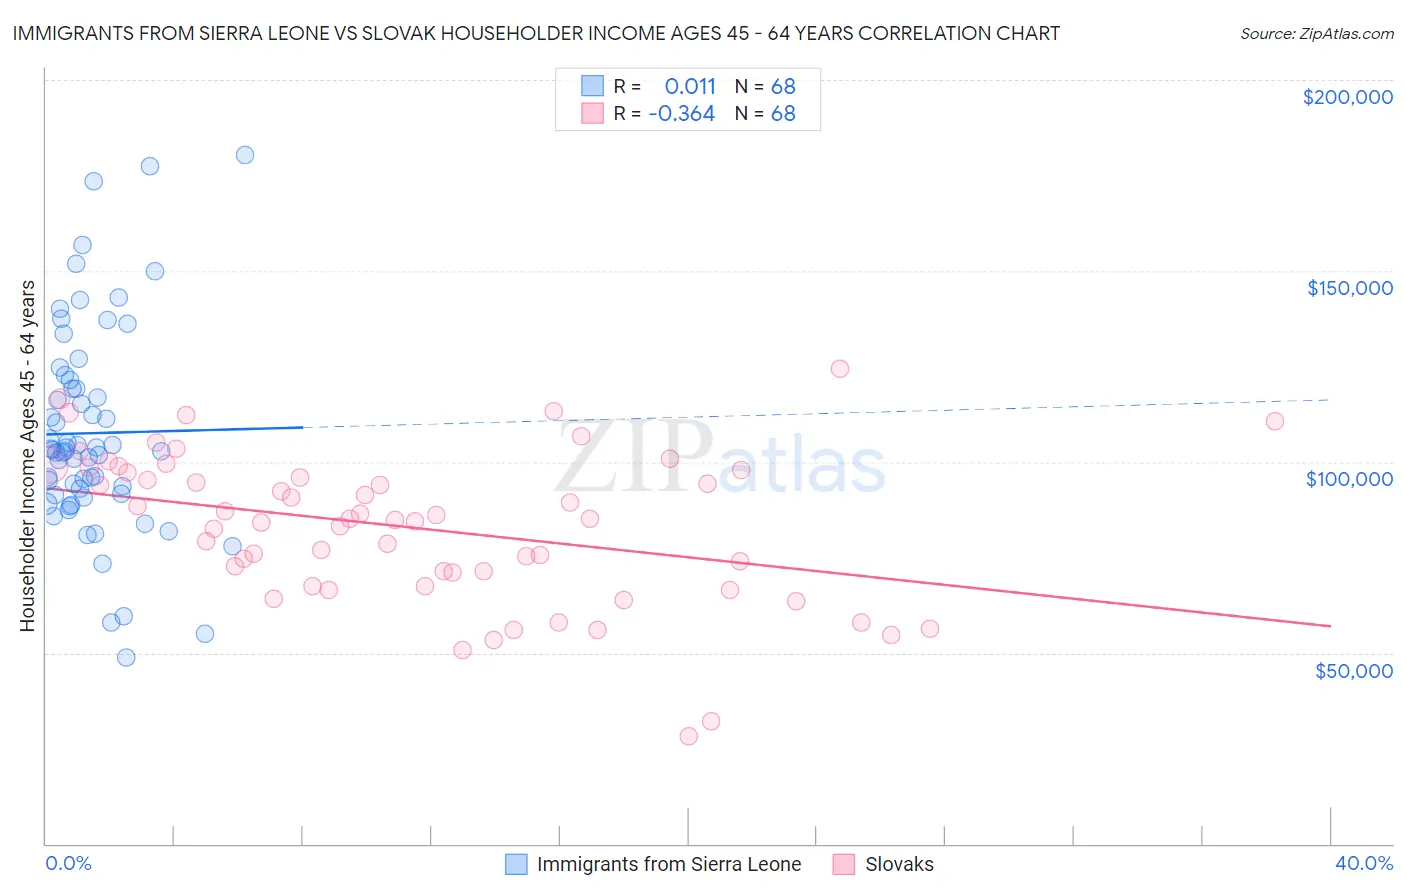 Immigrants from Sierra Leone vs Slovak Householder Income Ages 45 - 64 years